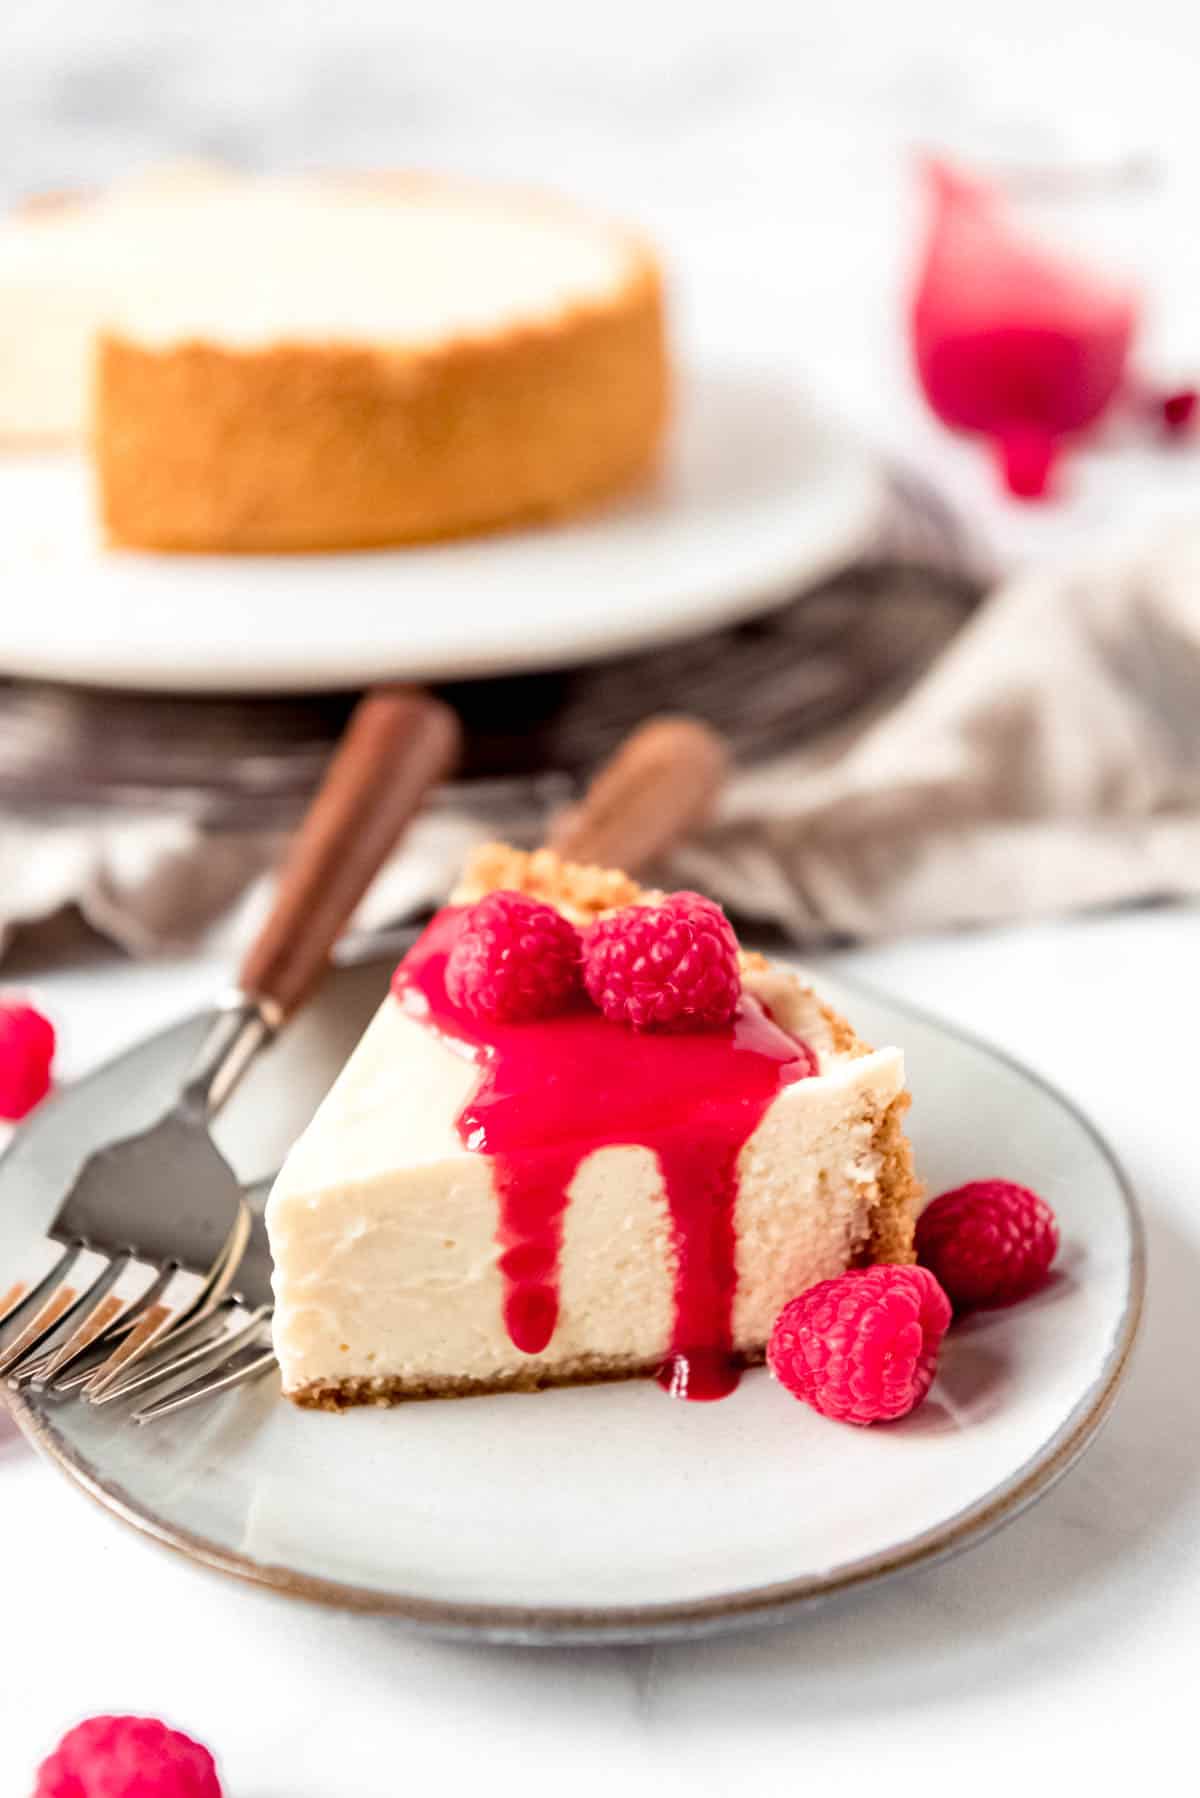 A slice of cheesecake with raspberry sauce and raspberries on top.